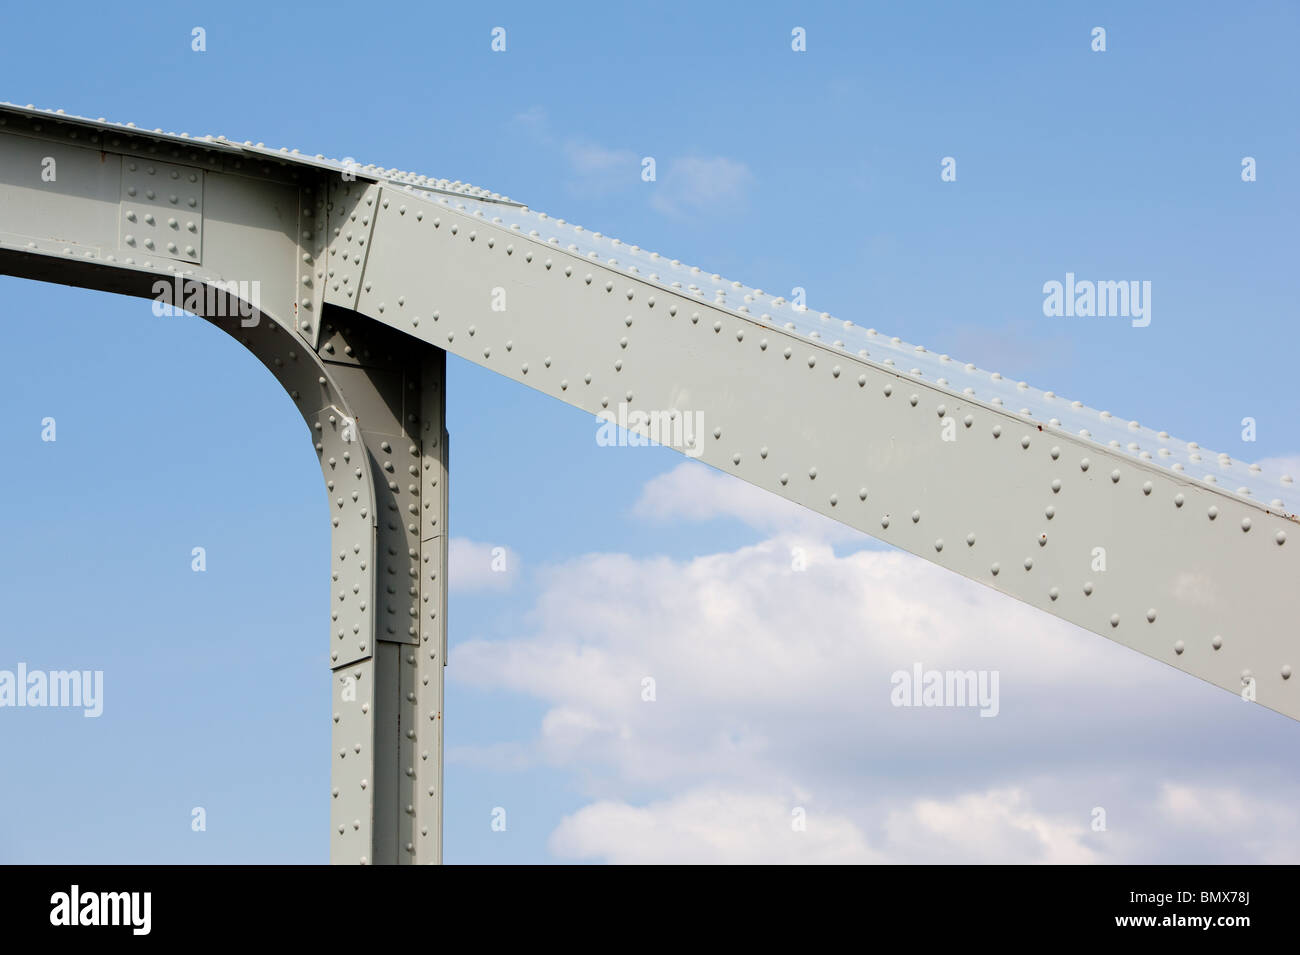 Riveted joints in the iron bridge support structure Stock Photo